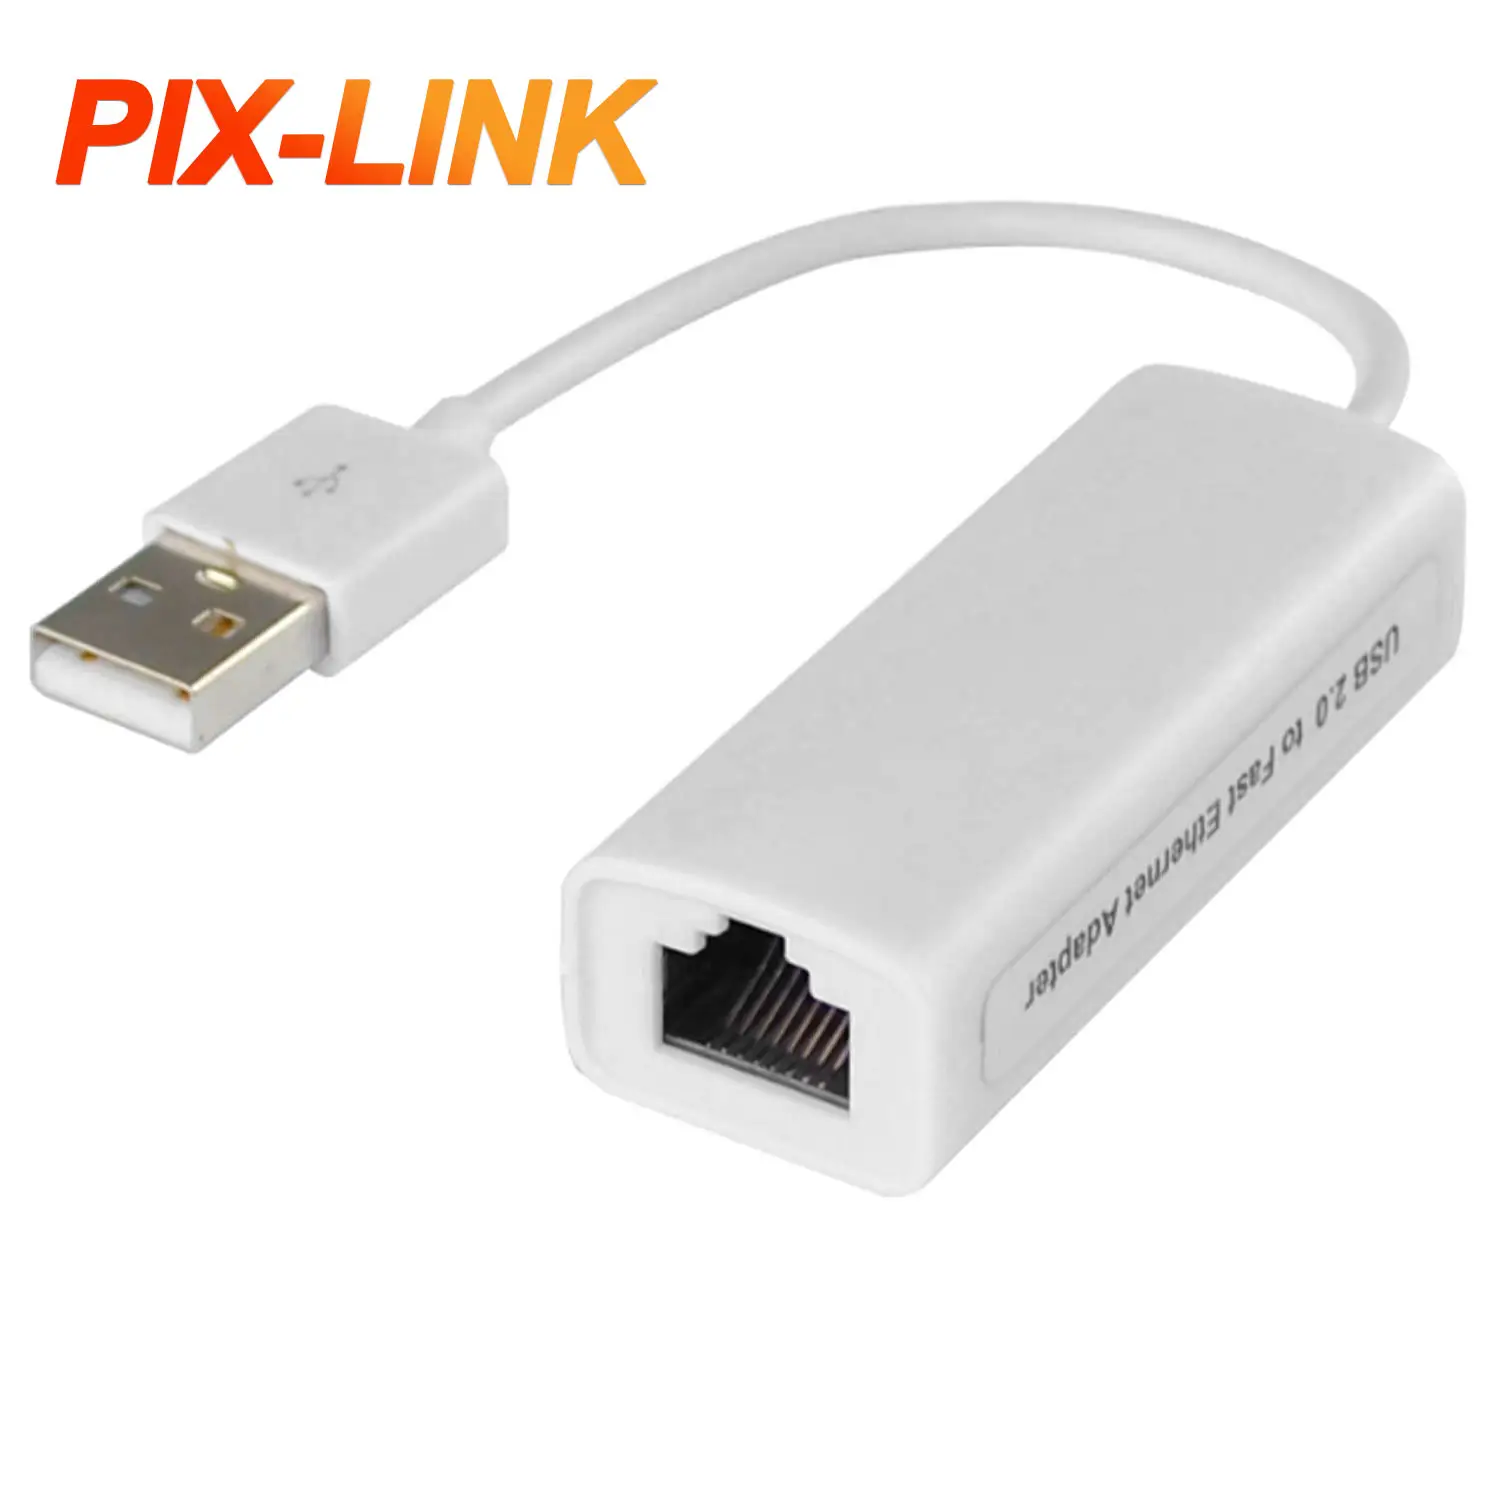 USB network card adapter usb 2.0 to rj45 Ethernet 10/100m Wired Lan Adapter for PC